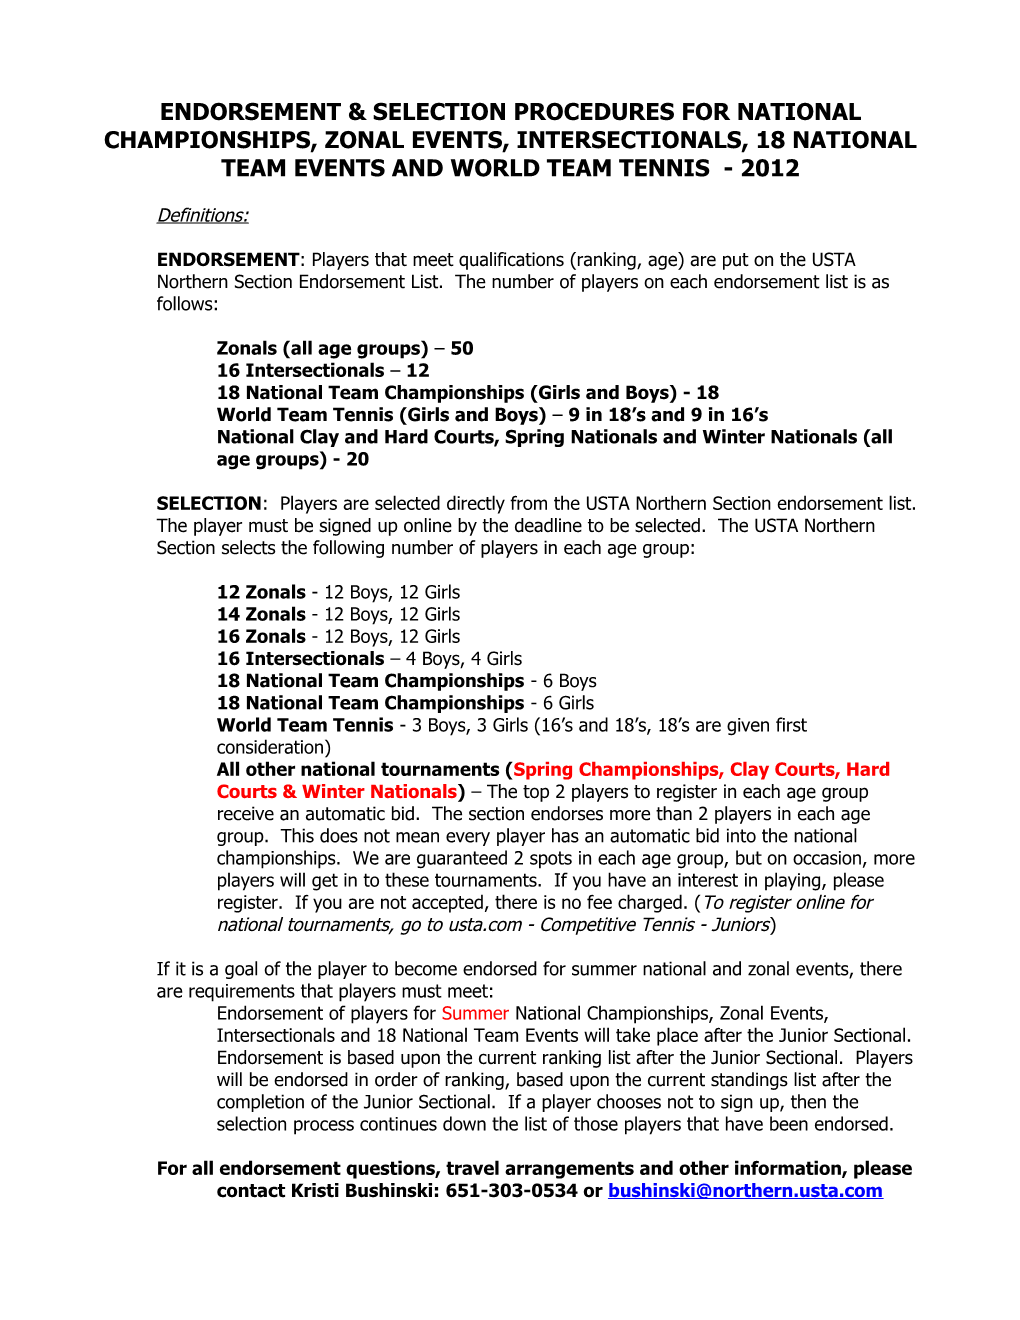 ENDORSEMENT & ELIGIBILITY PROCEDURES for SUMMER NATIONAL and ZONAL EVENTS - Summer 2007